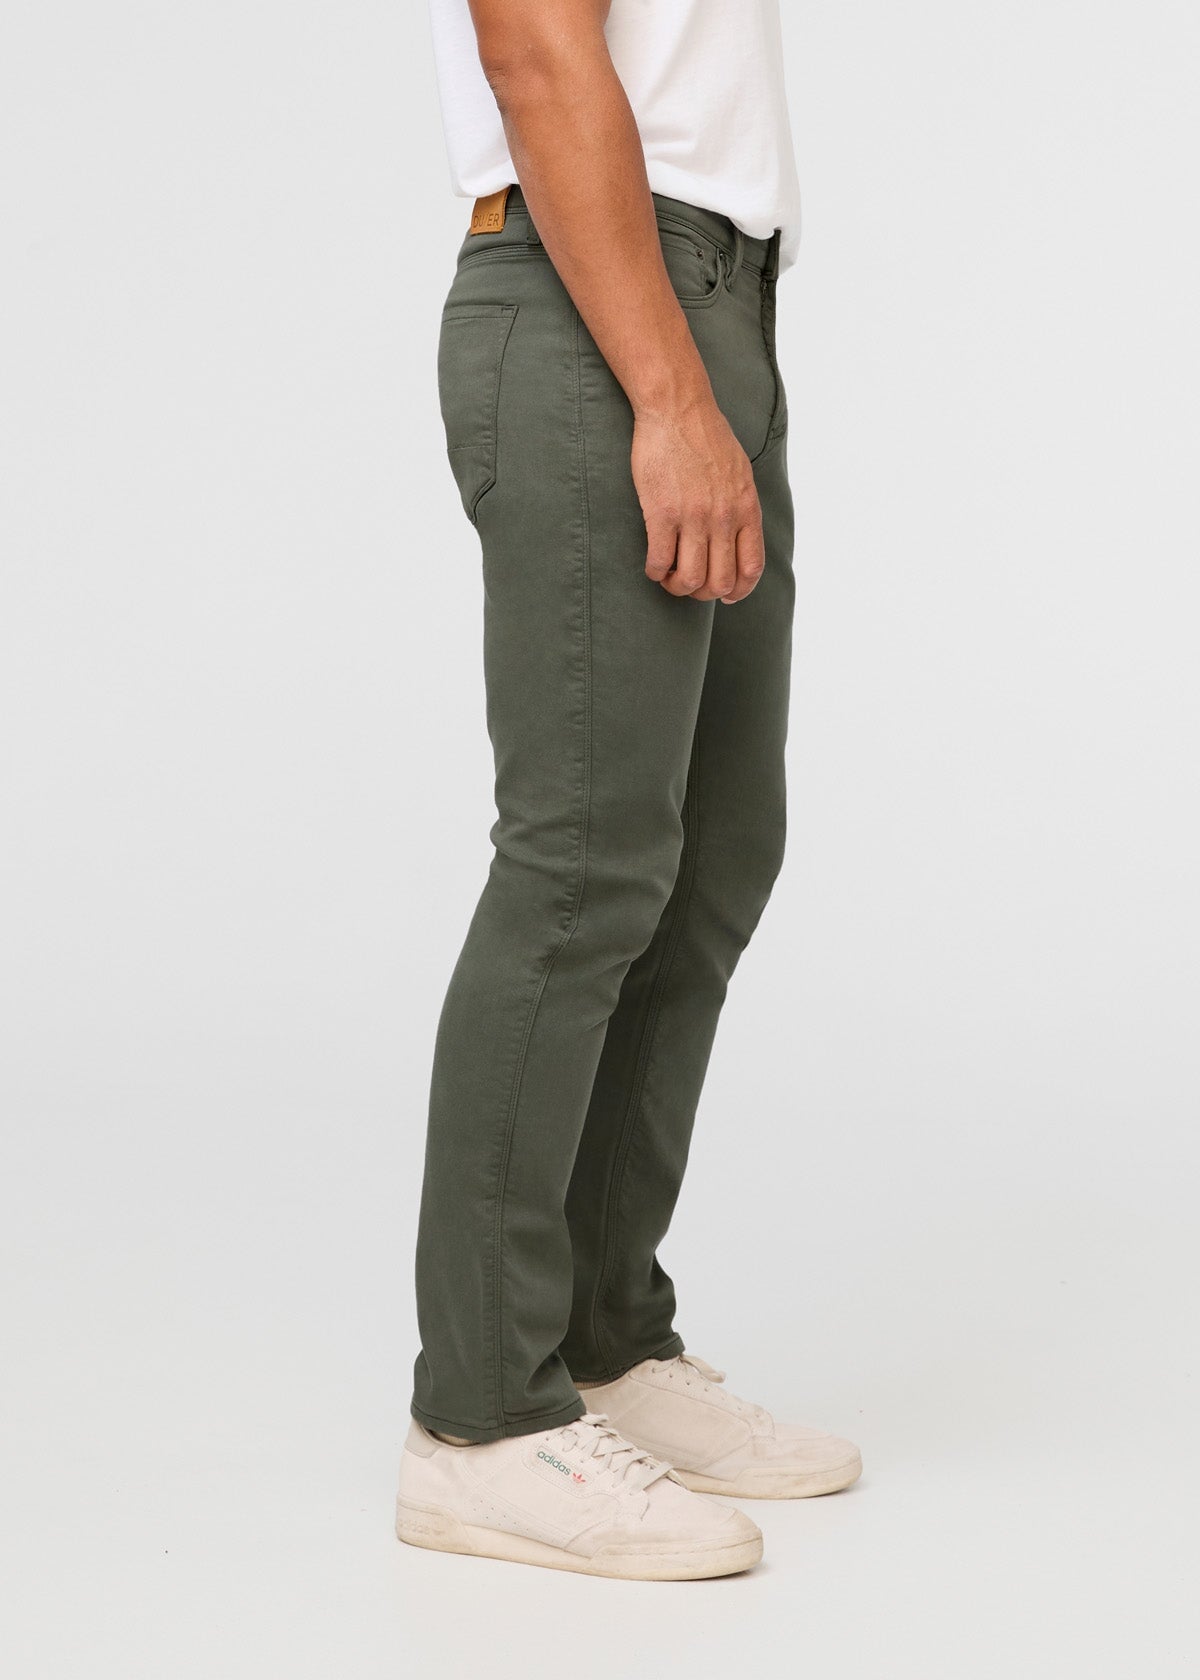 mens grey-green relaxed fit dress sweatpant side